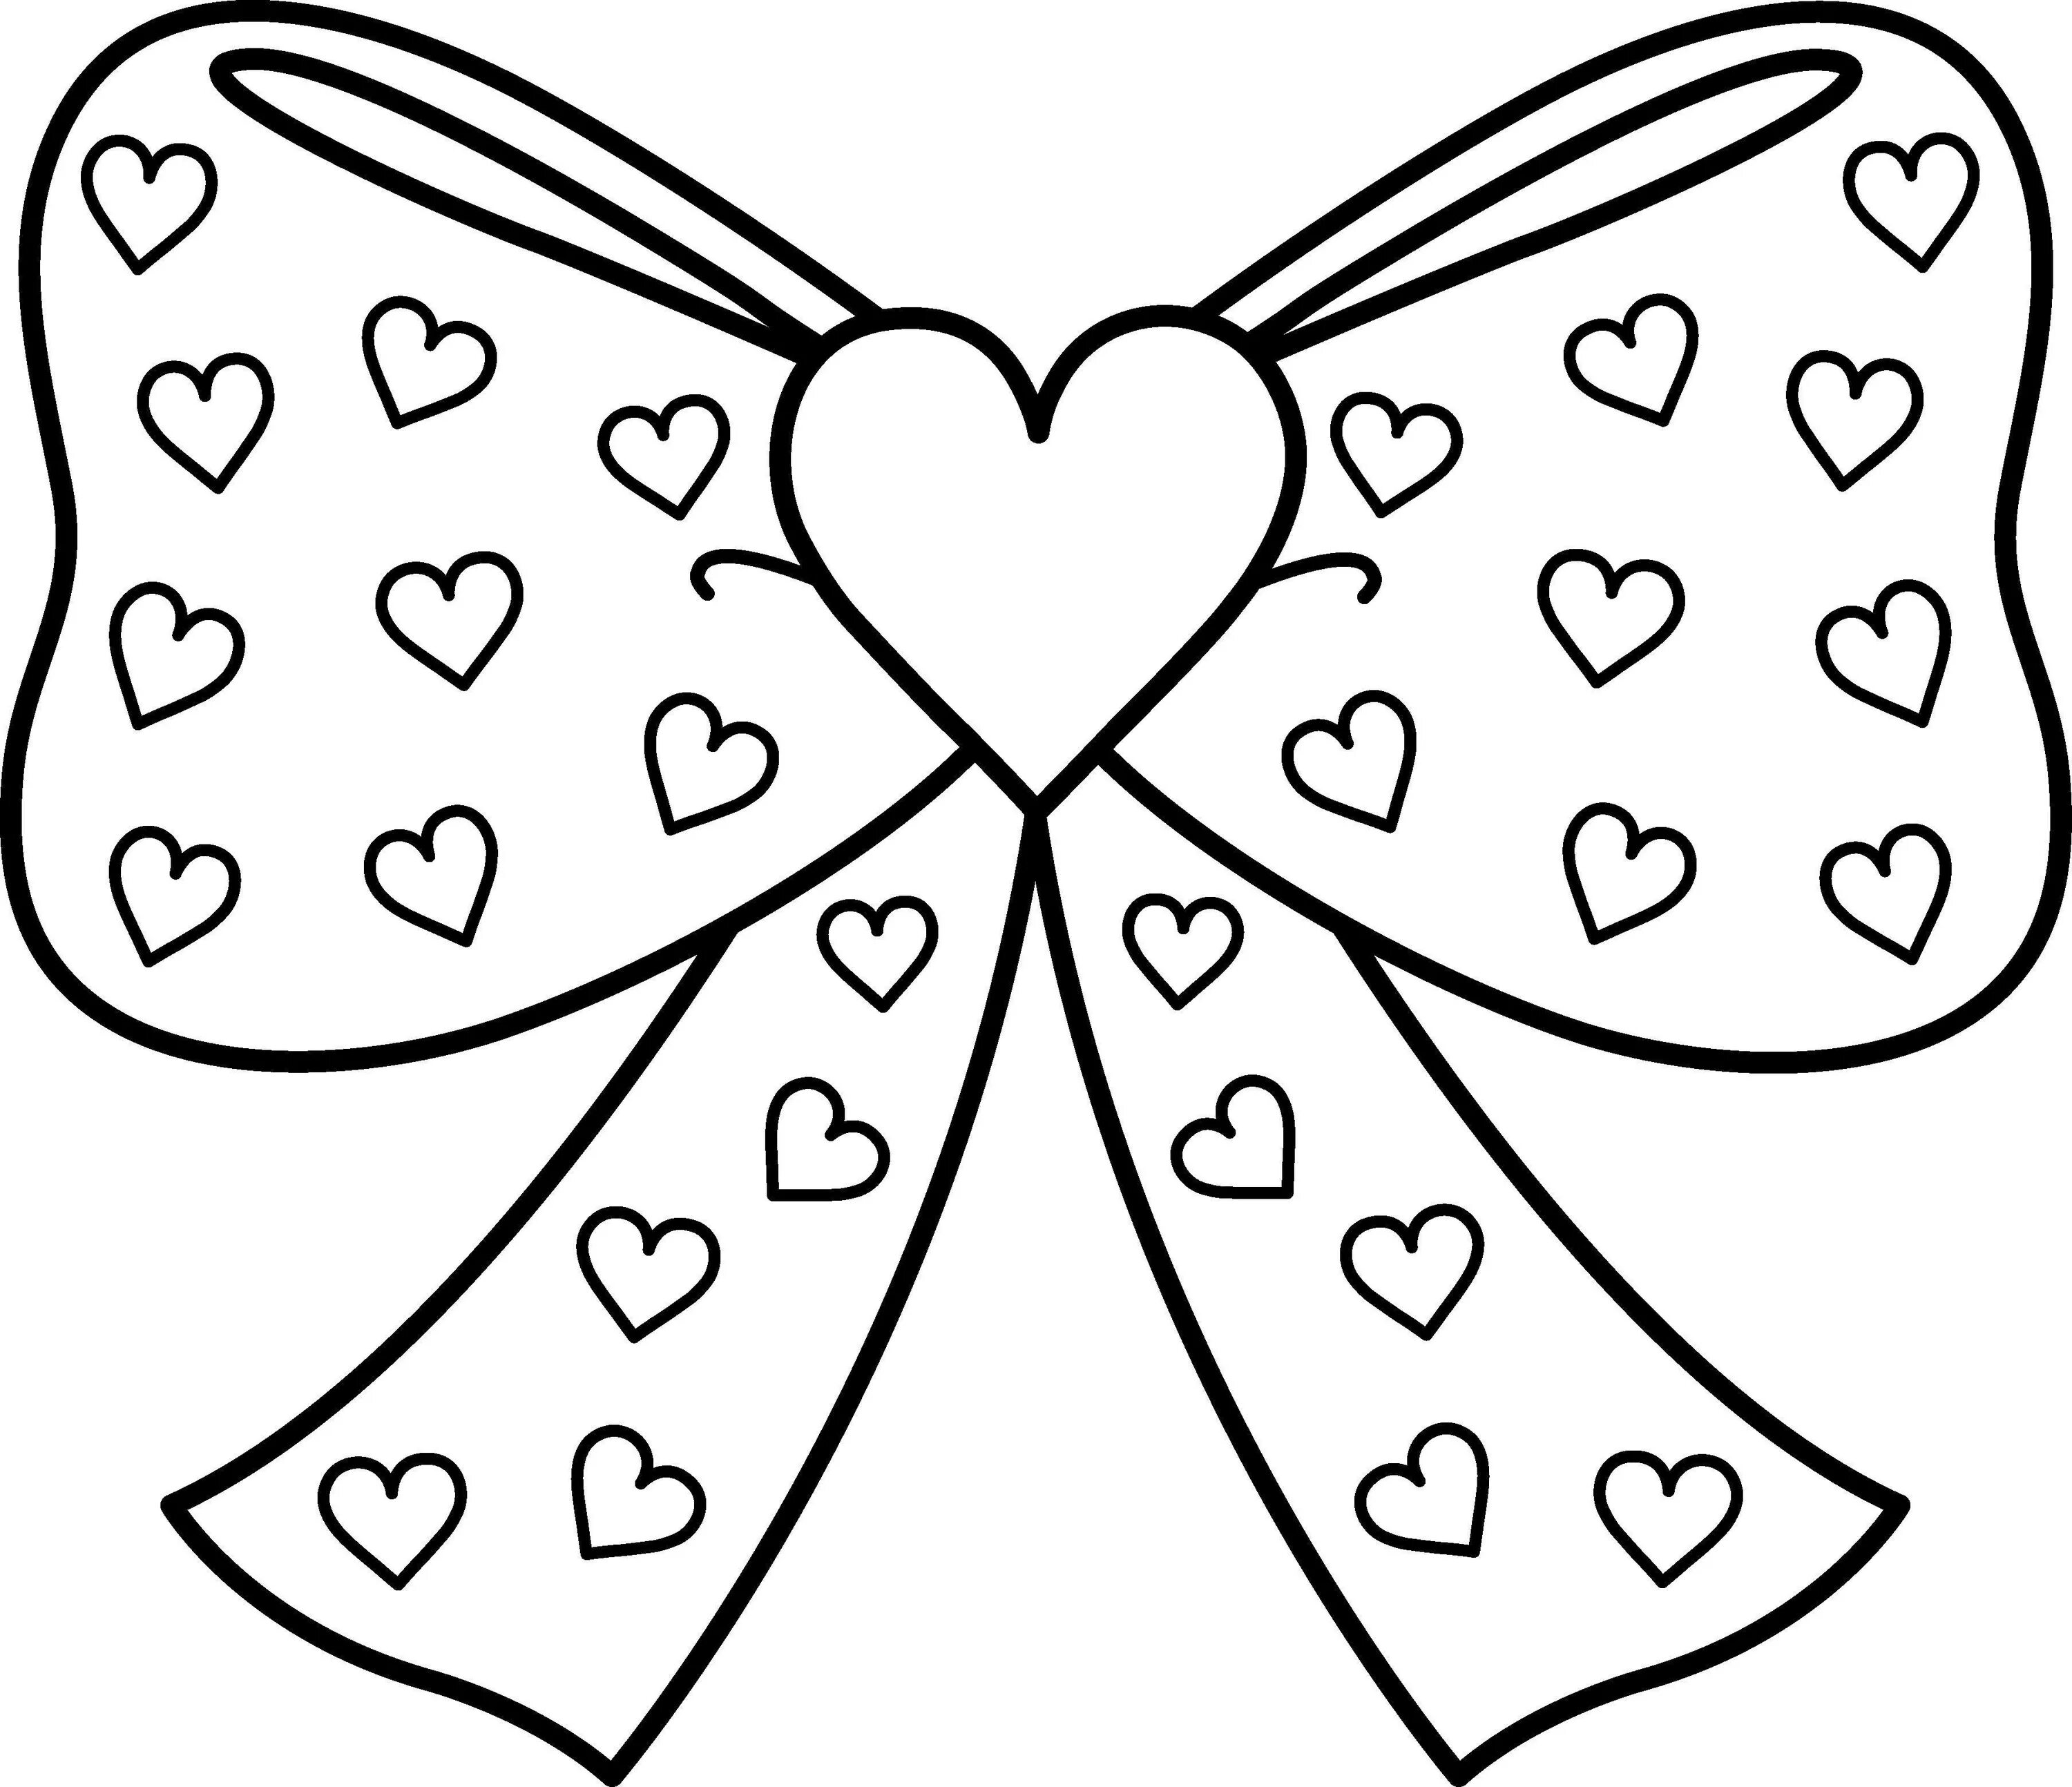 Coloring pages with bows for children